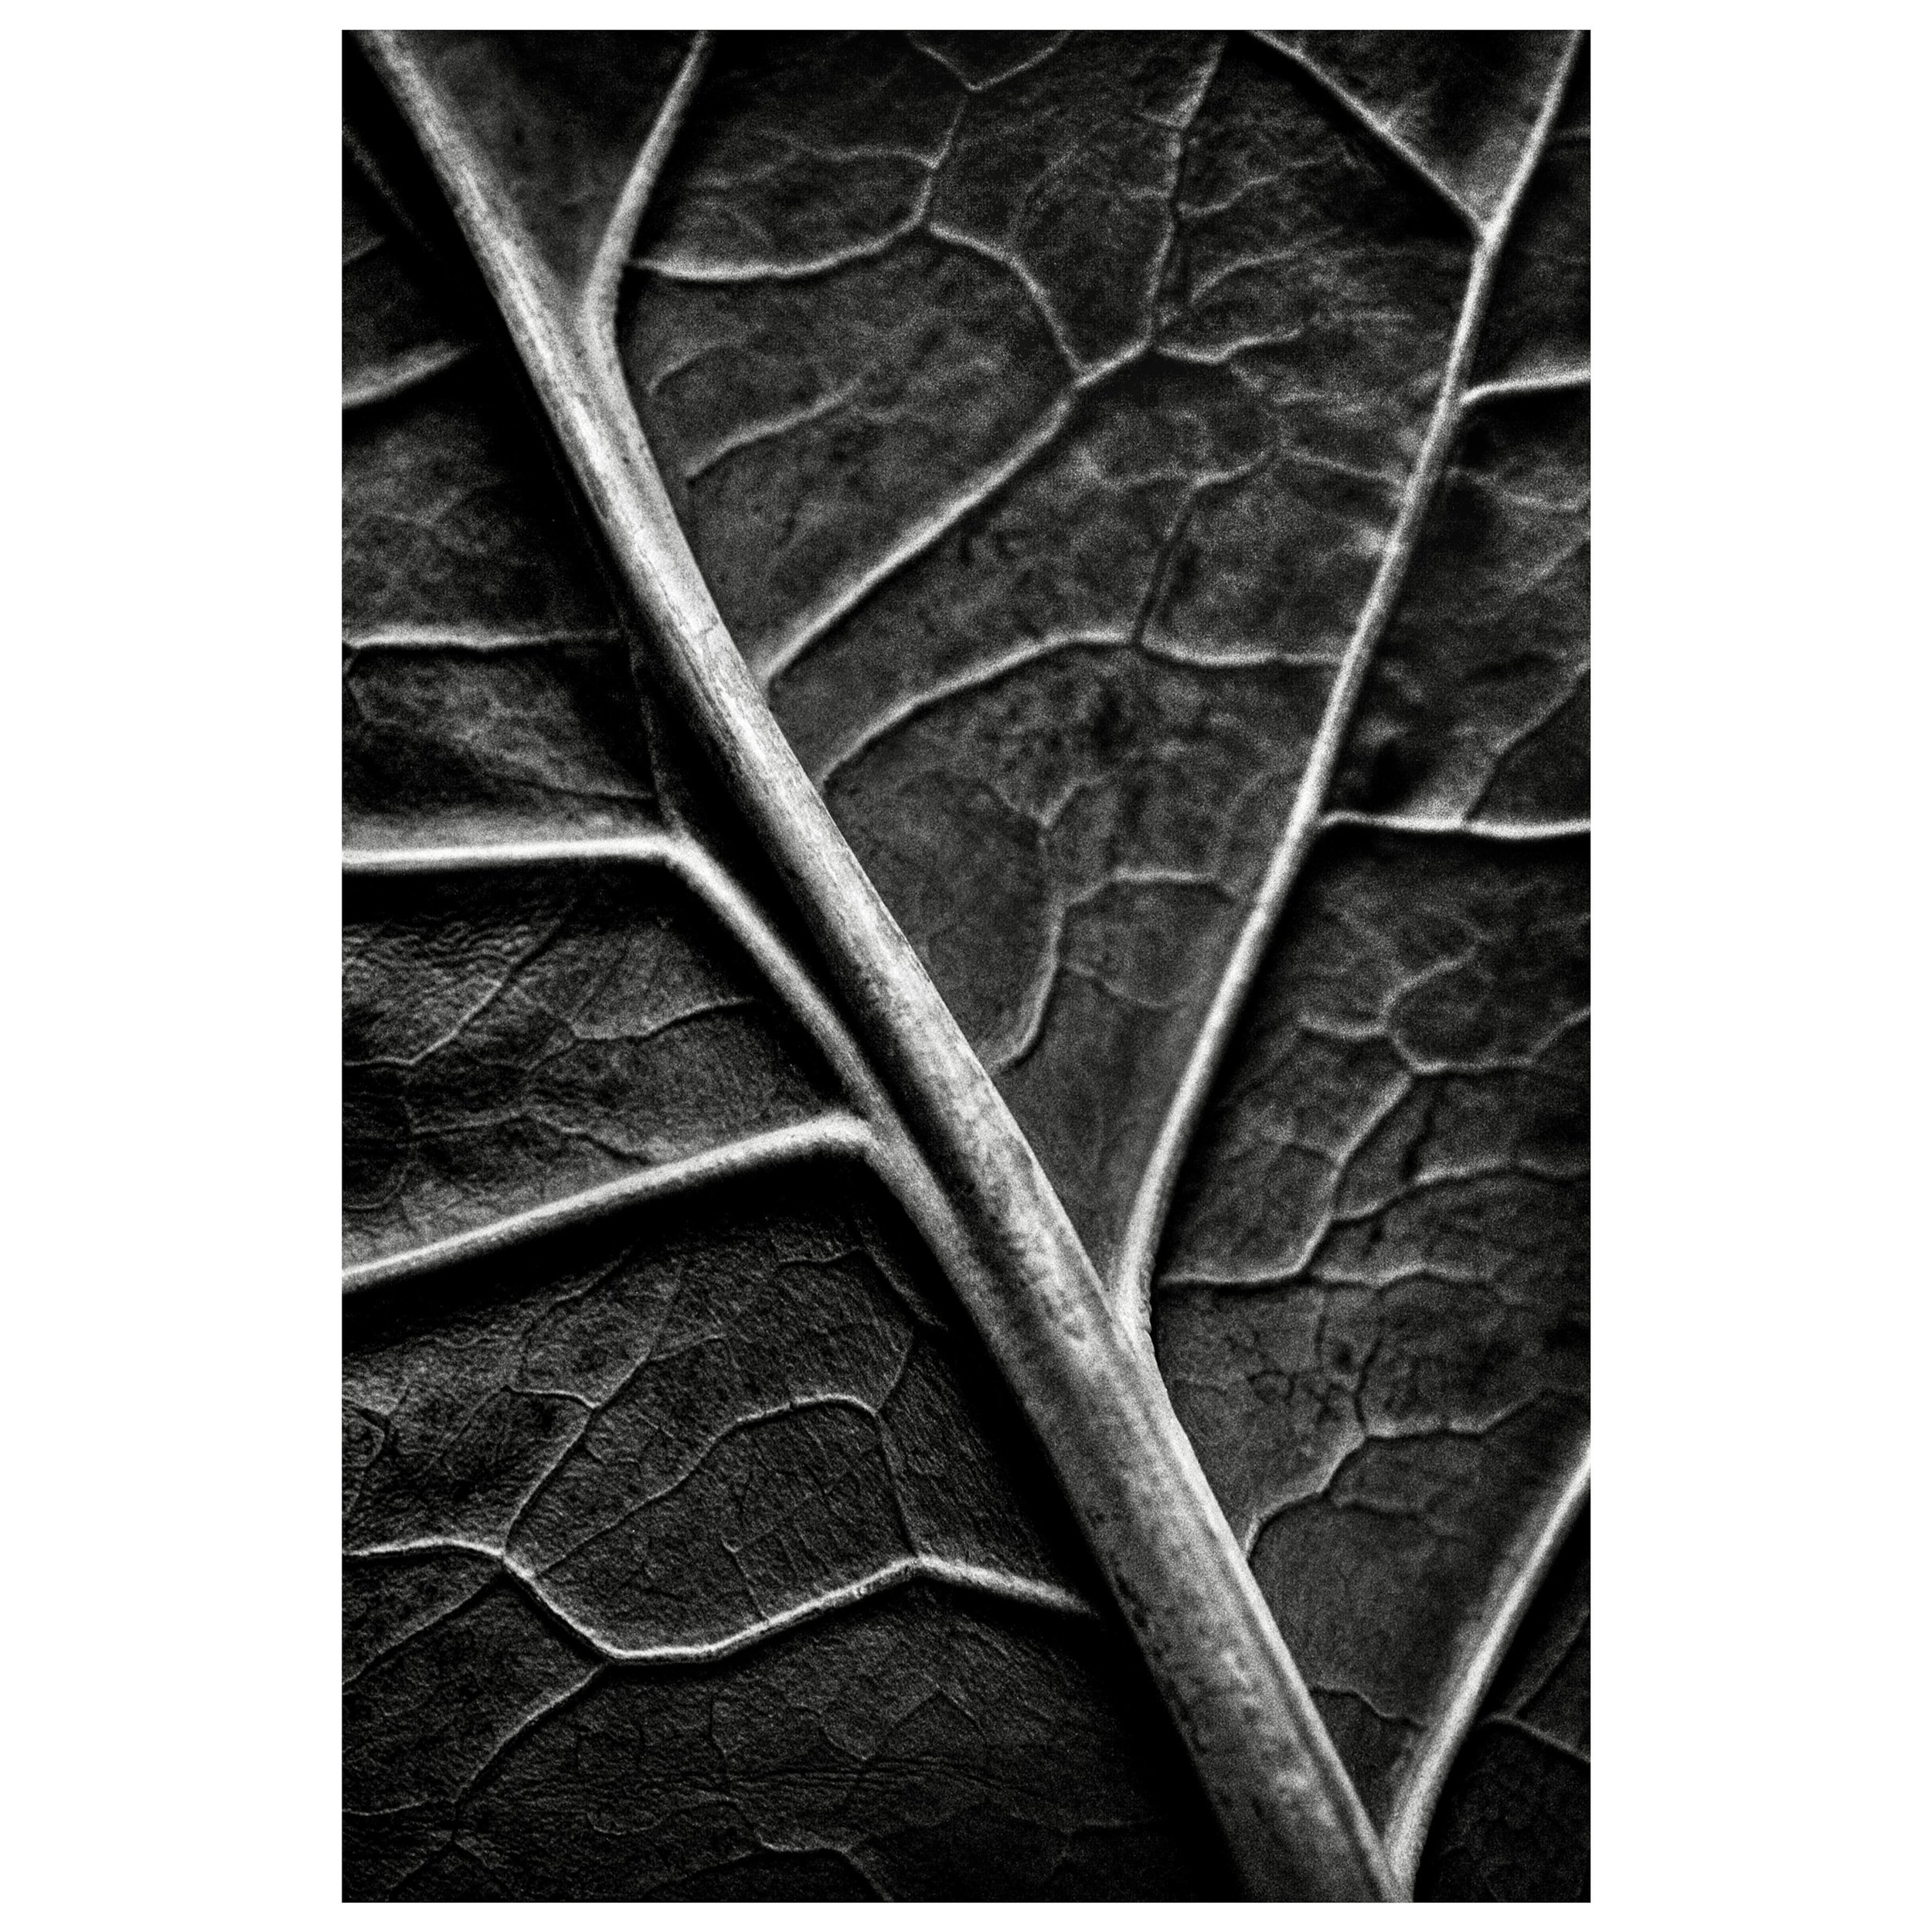 Exploring the subtle interplay of light and shadow with the intricate vein structure.
-
#blackandwhitephotography #fineartphotography #blackandwhiteprints #plantart #artcollector #studiophotography #lisastonephotography #foothillcollegephoto #bnw_and